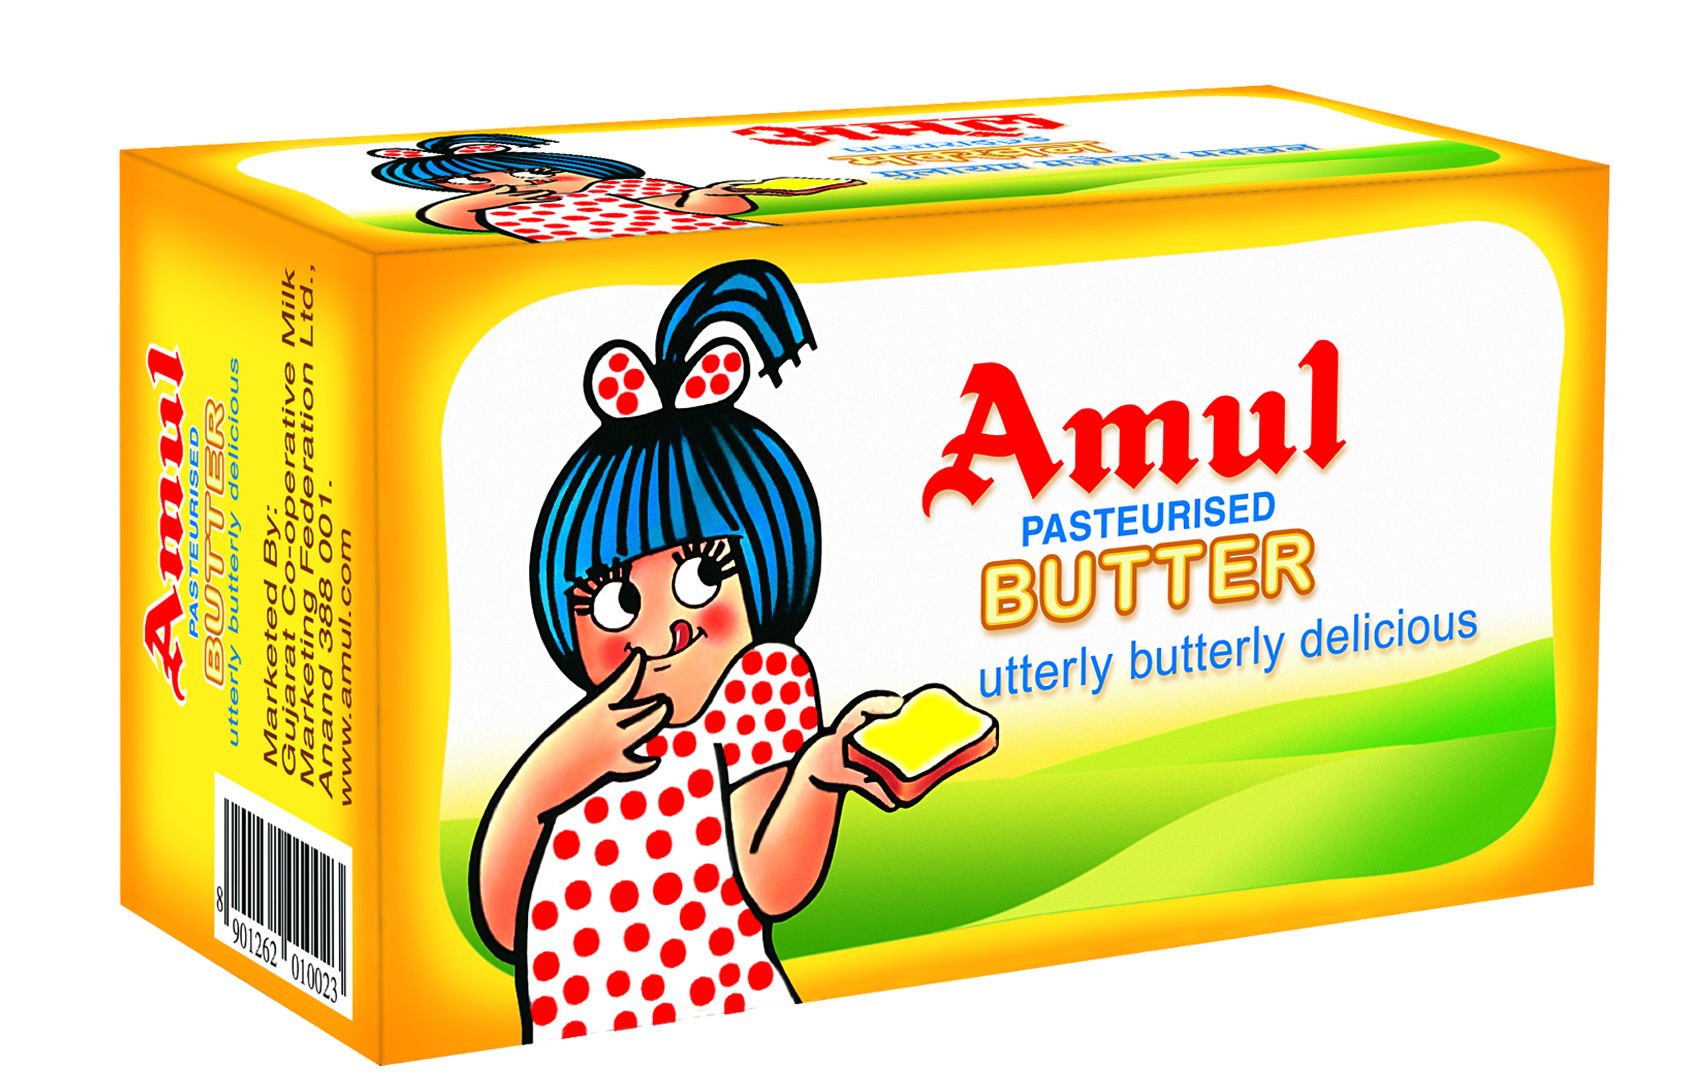 BUTTER AND CHEESE - AMUL BUTTER 500 GM